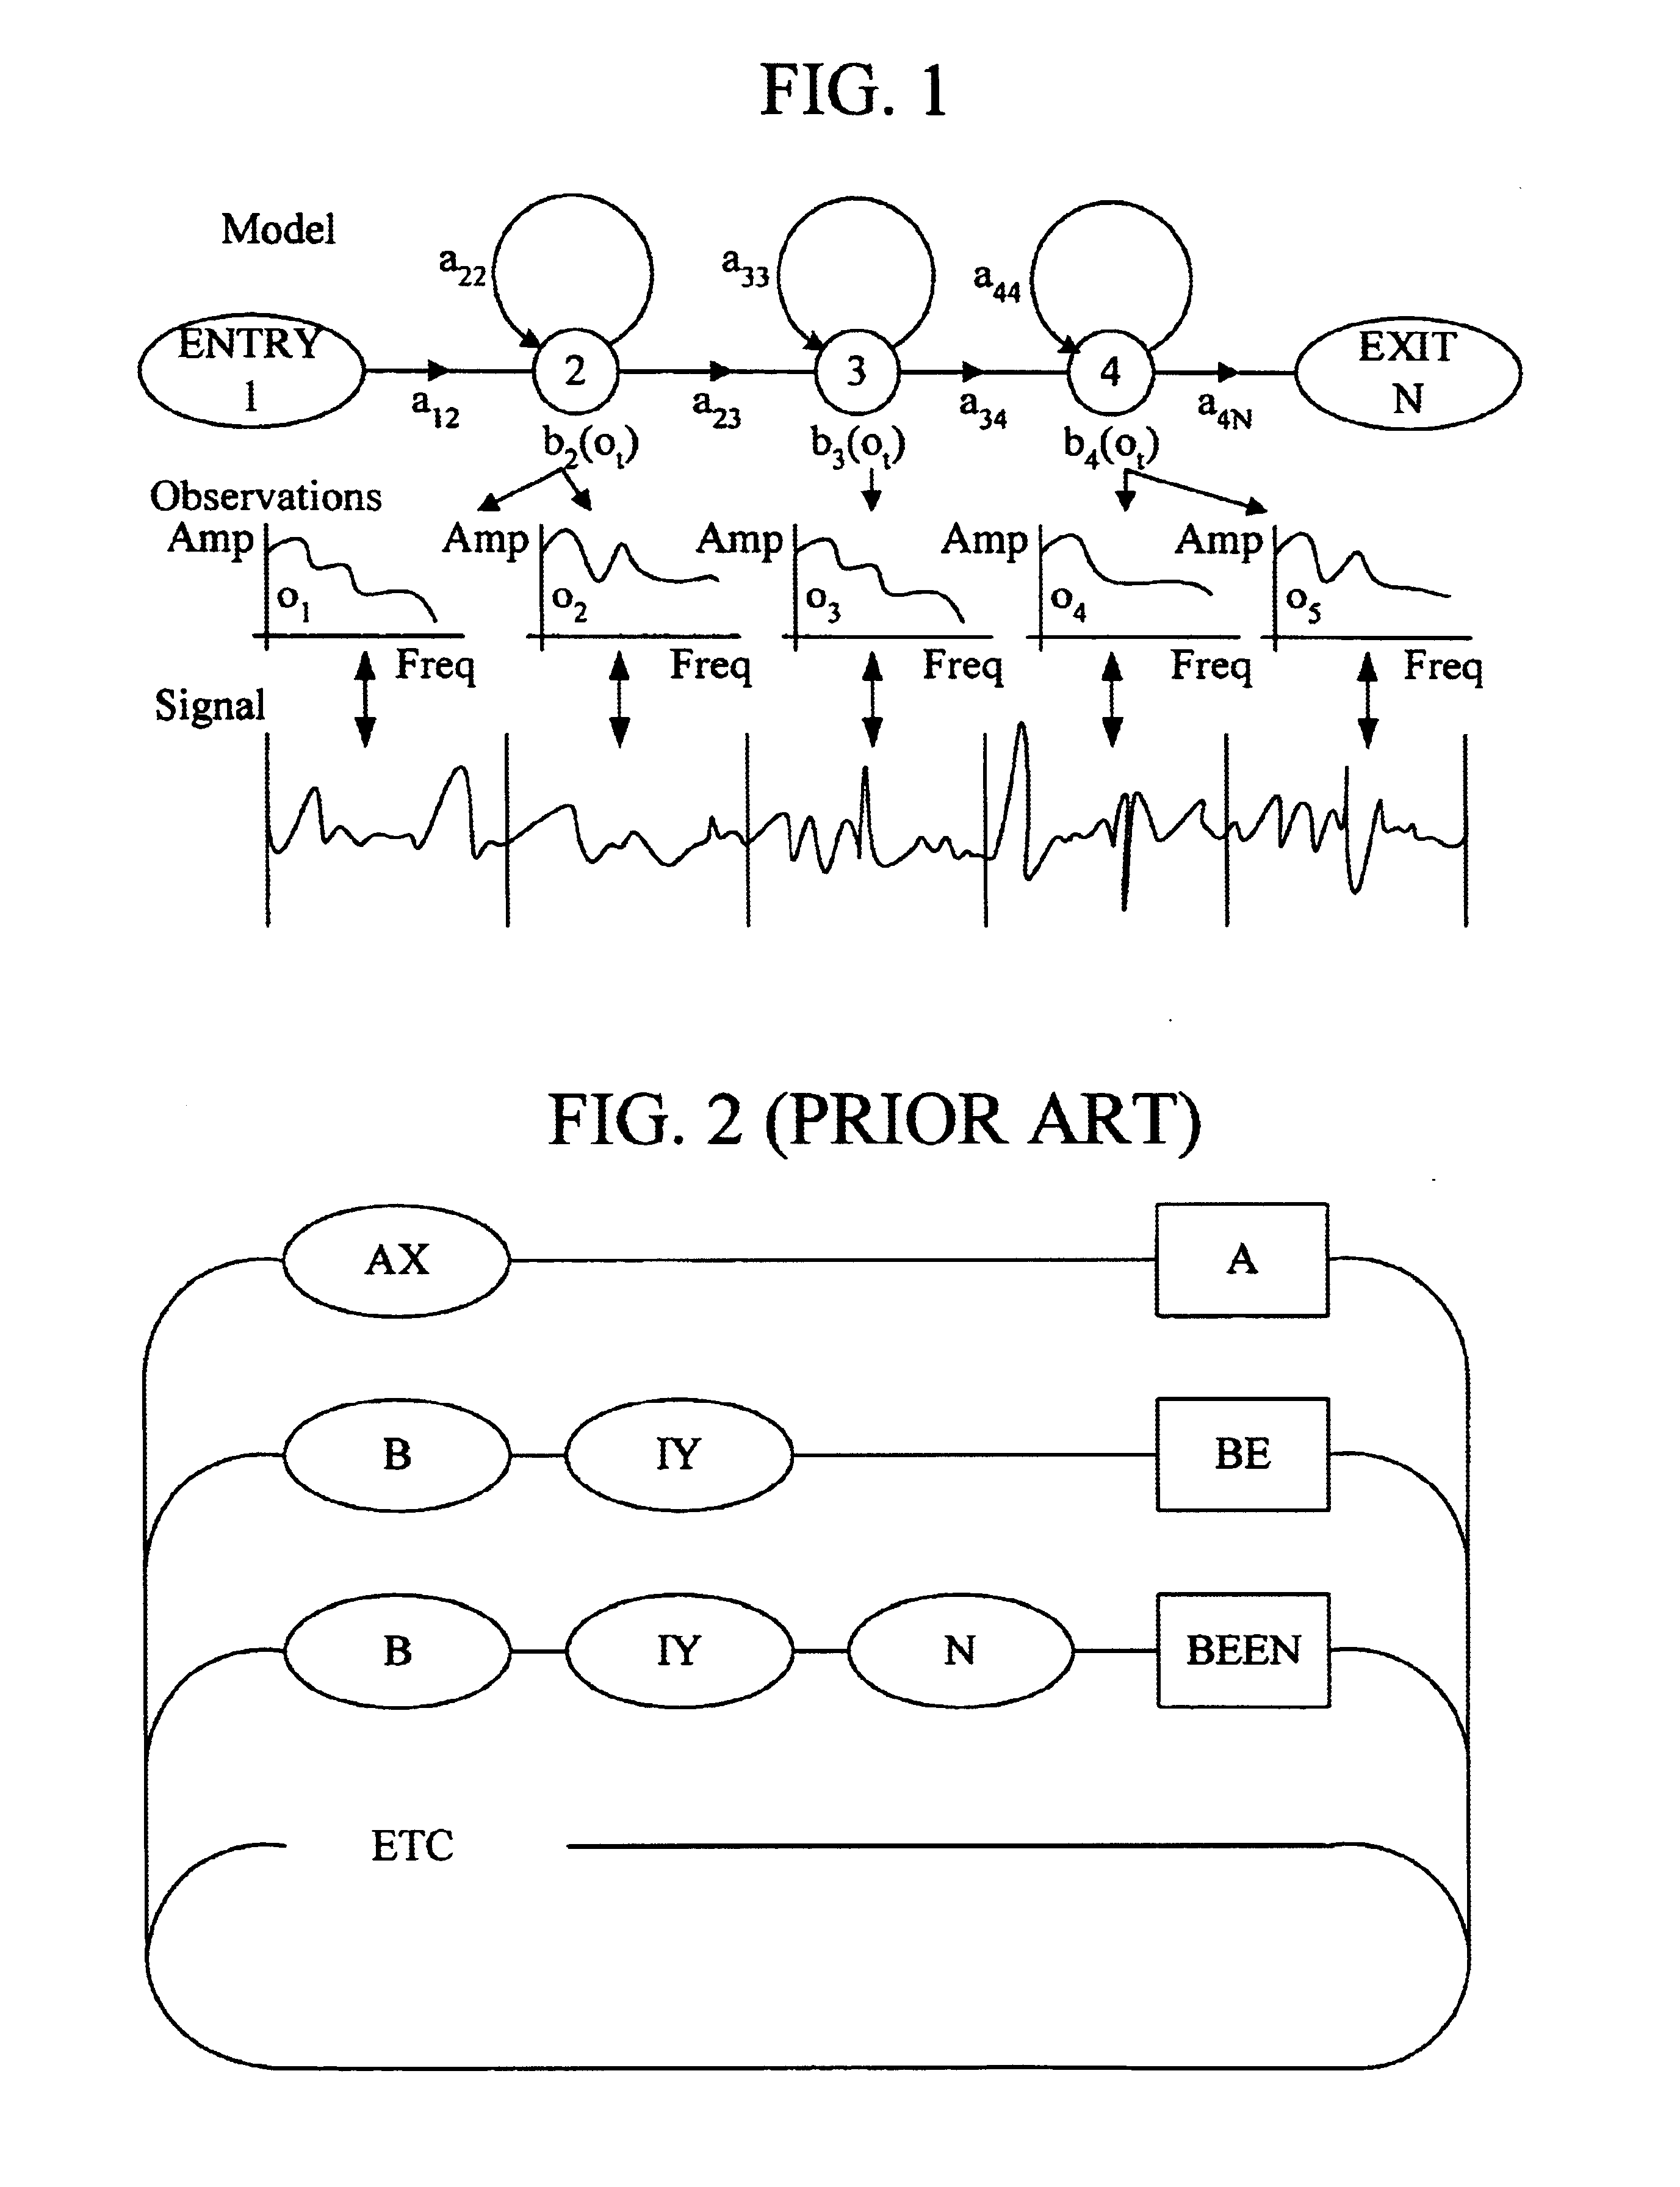 Network and language models for use in a speech recognition system